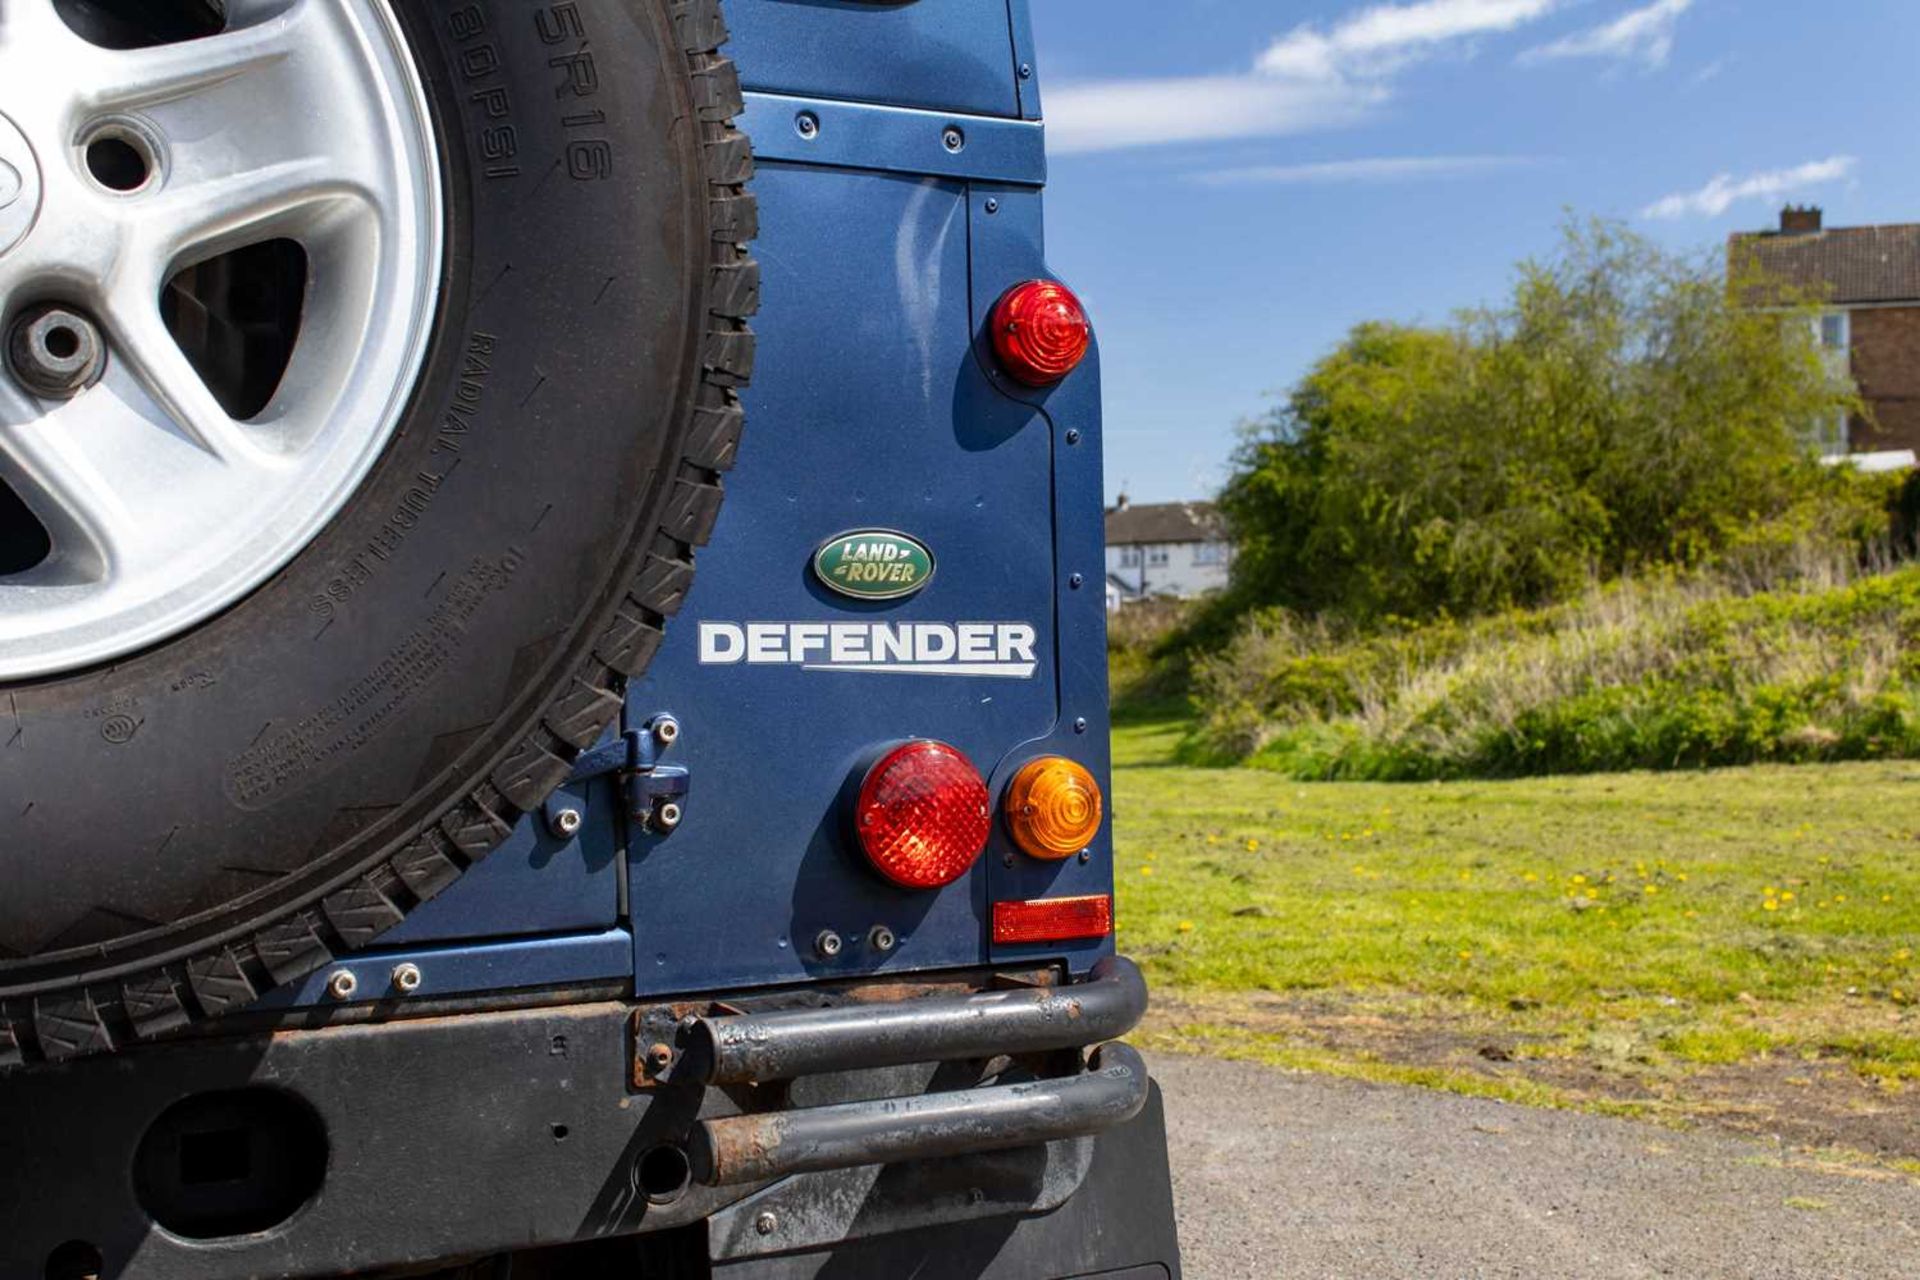 2007 Land Rover Defender 90 County  Powered by the 2.4-litre TDCi unit and features numerous tastefu - Image 27 of 76